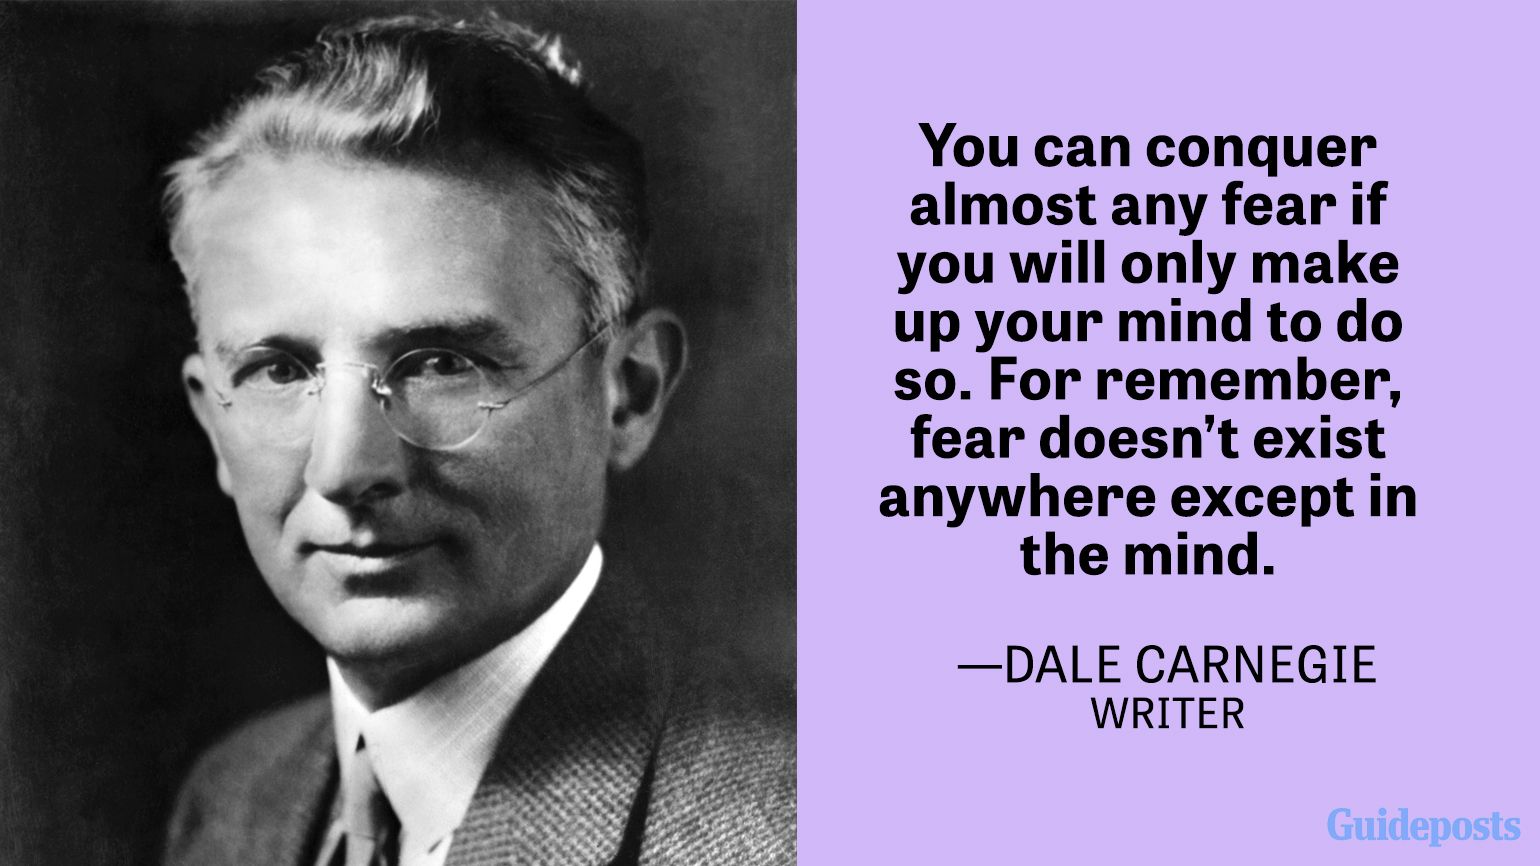 Dale Carnegie, author of "How to Win Friends and Influence People." Head and shoulders portrait.